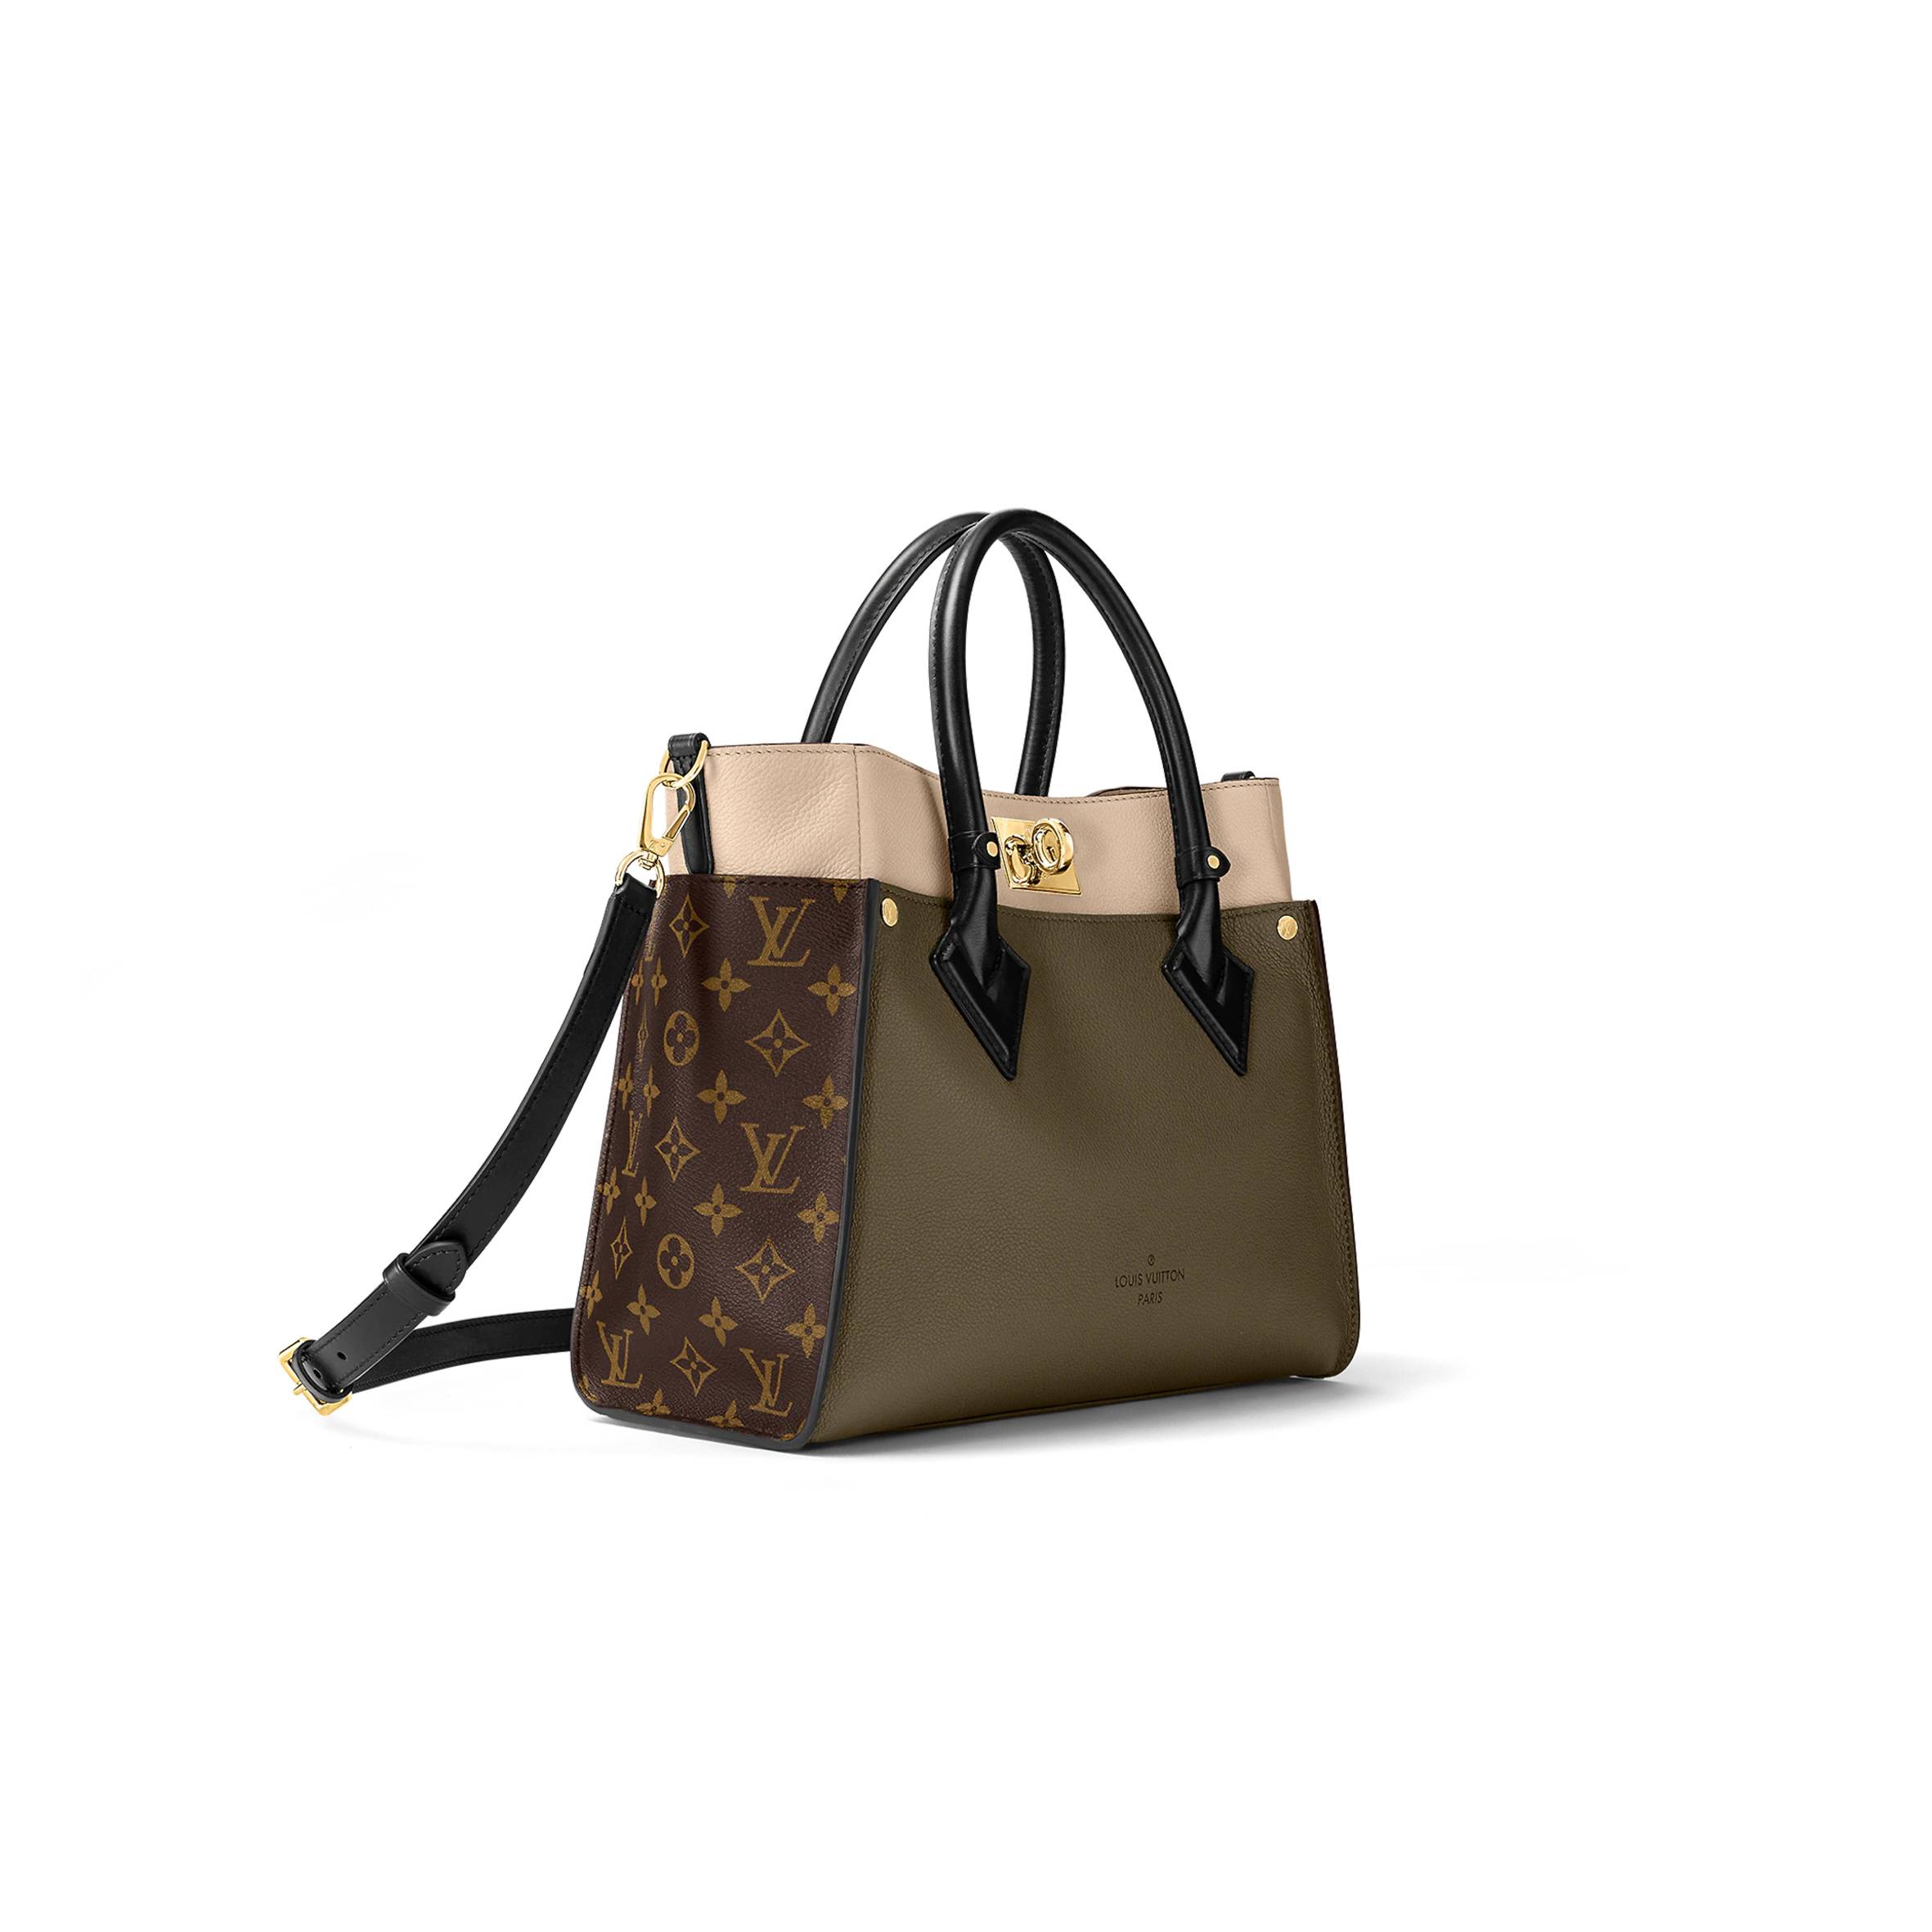 LOUIS VUITTON ON MY SIDE MM M55302 (30.5*24.5*14cm)